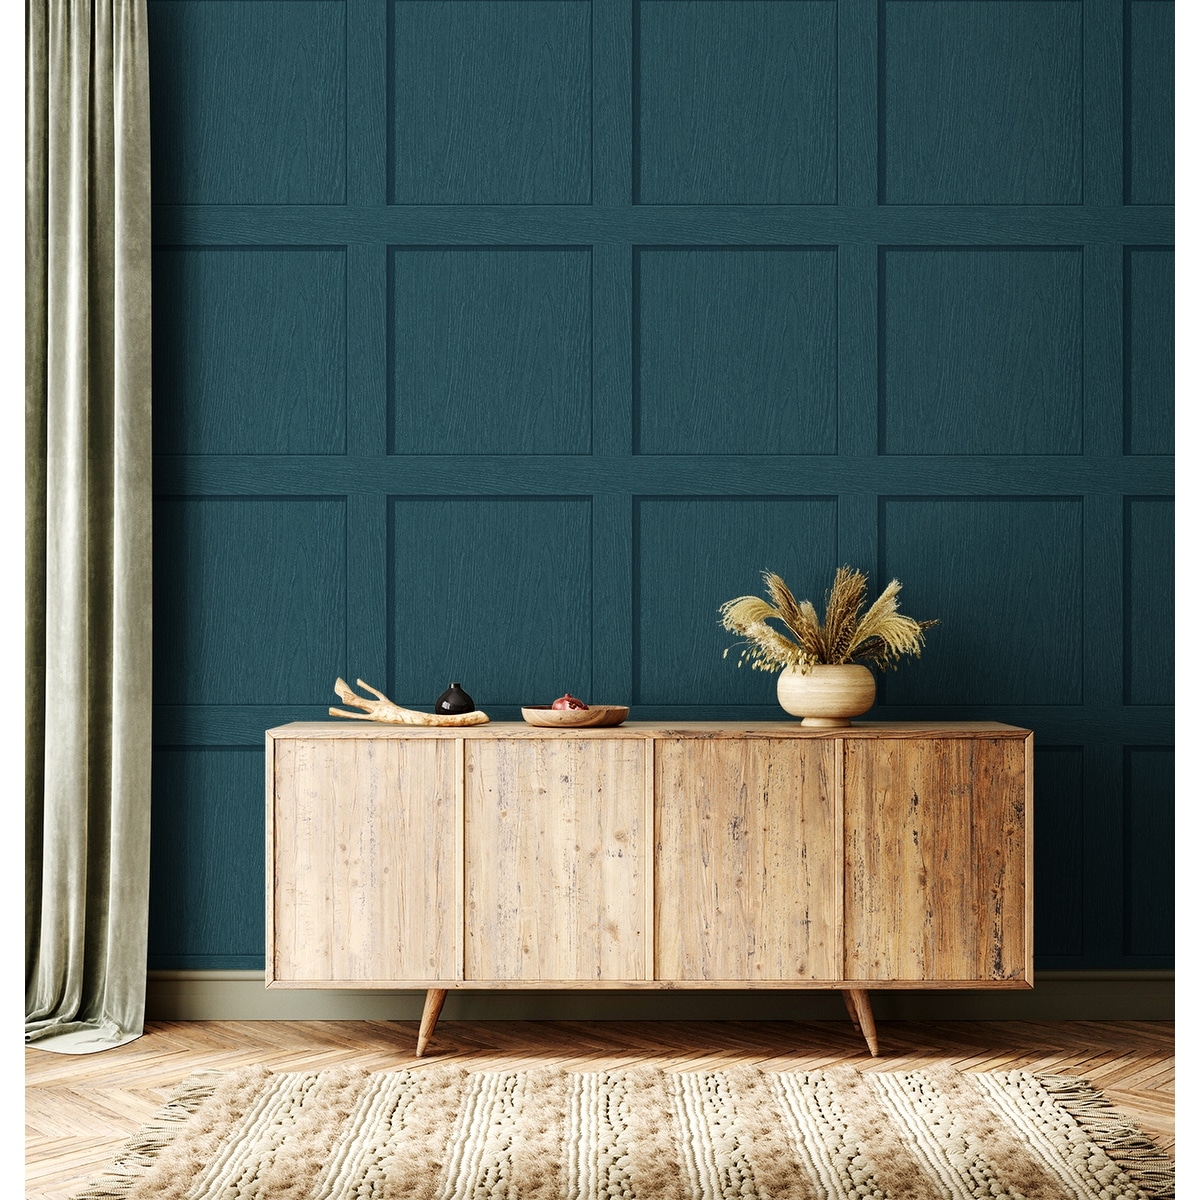 Buy Teal Wallpaper Stick On Online In India  Etsy India